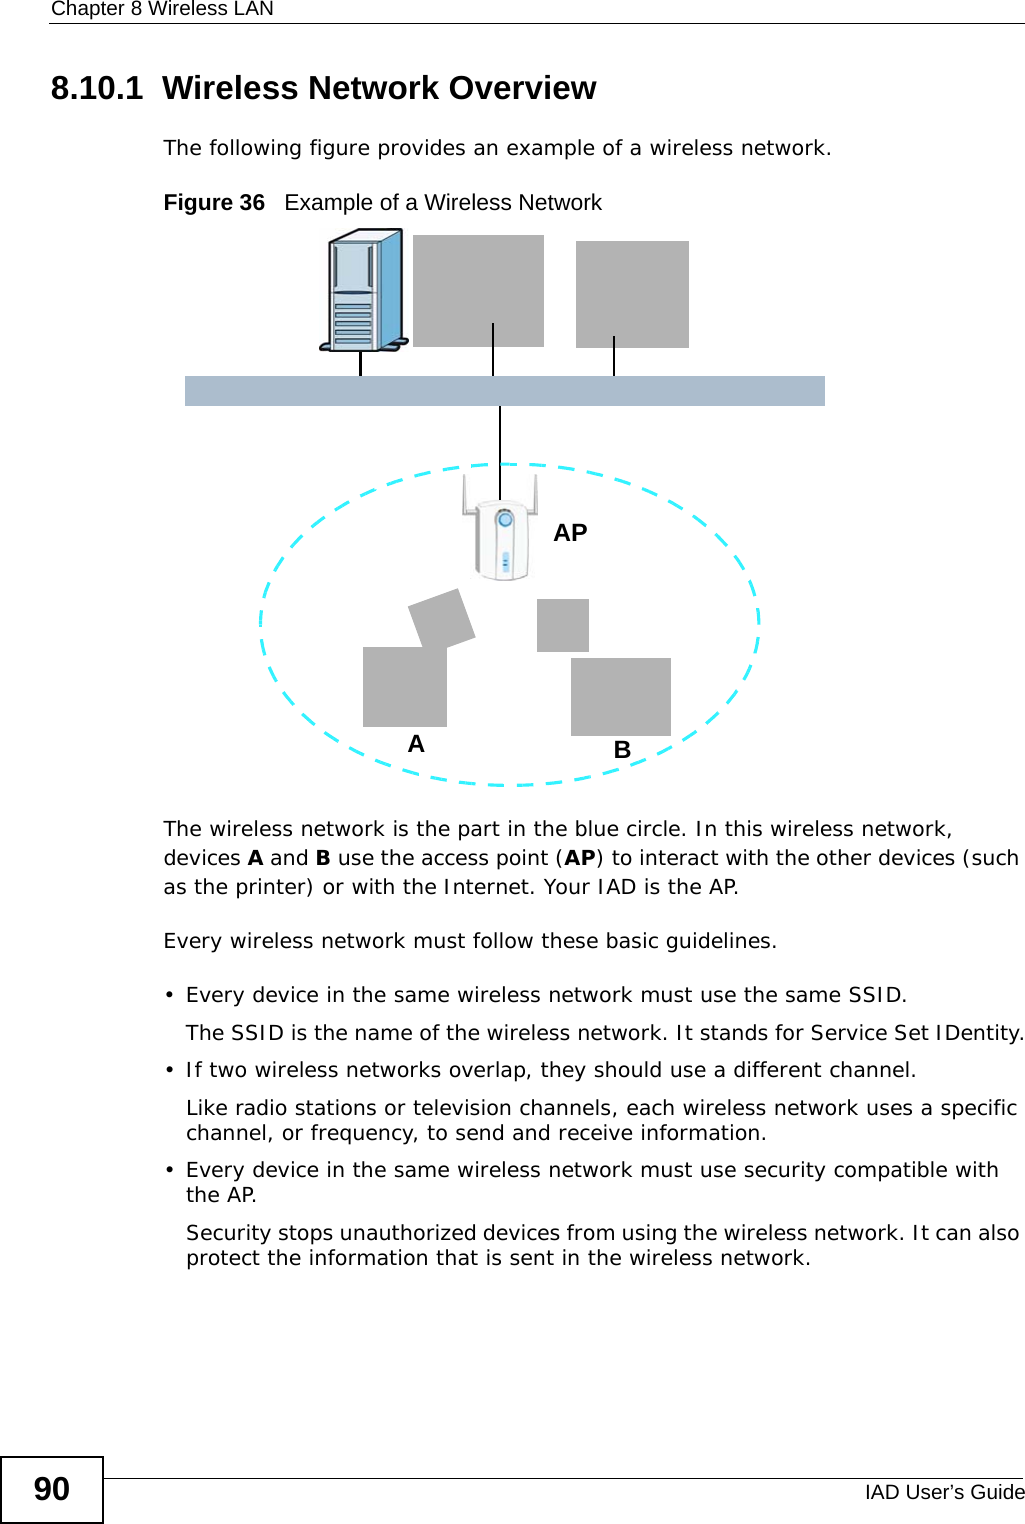 Chapter 8 Wireless LANIAD User’s Guide908.10.1  Wireless Network OverviewThe following figure provides an example of a wireless network.Figure 36   Example of a Wireless NetworkThe wireless network is the part in the blue circle. In this wireless network, devices A and B use the access point (AP) to interact with the other devices (such as the printer) or with the Internet. Your IAD is the AP.Every wireless network must follow these basic guidelines.• Every device in the same wireless network must use the same SSID.The SSID is the name of the wireless network. It stands for Service Set IDentity.• If two wireless networks overlap, they should use a different channel.Like radio stations or television channels, each wireless network uses a specific channel, or frequency, to send and receive information.• Every device in the same wireless network must use security compatible with the AP.Security stops unauthorized devices from using the wireless network. It can also protect the information that is sent in the wireless network.ABAP